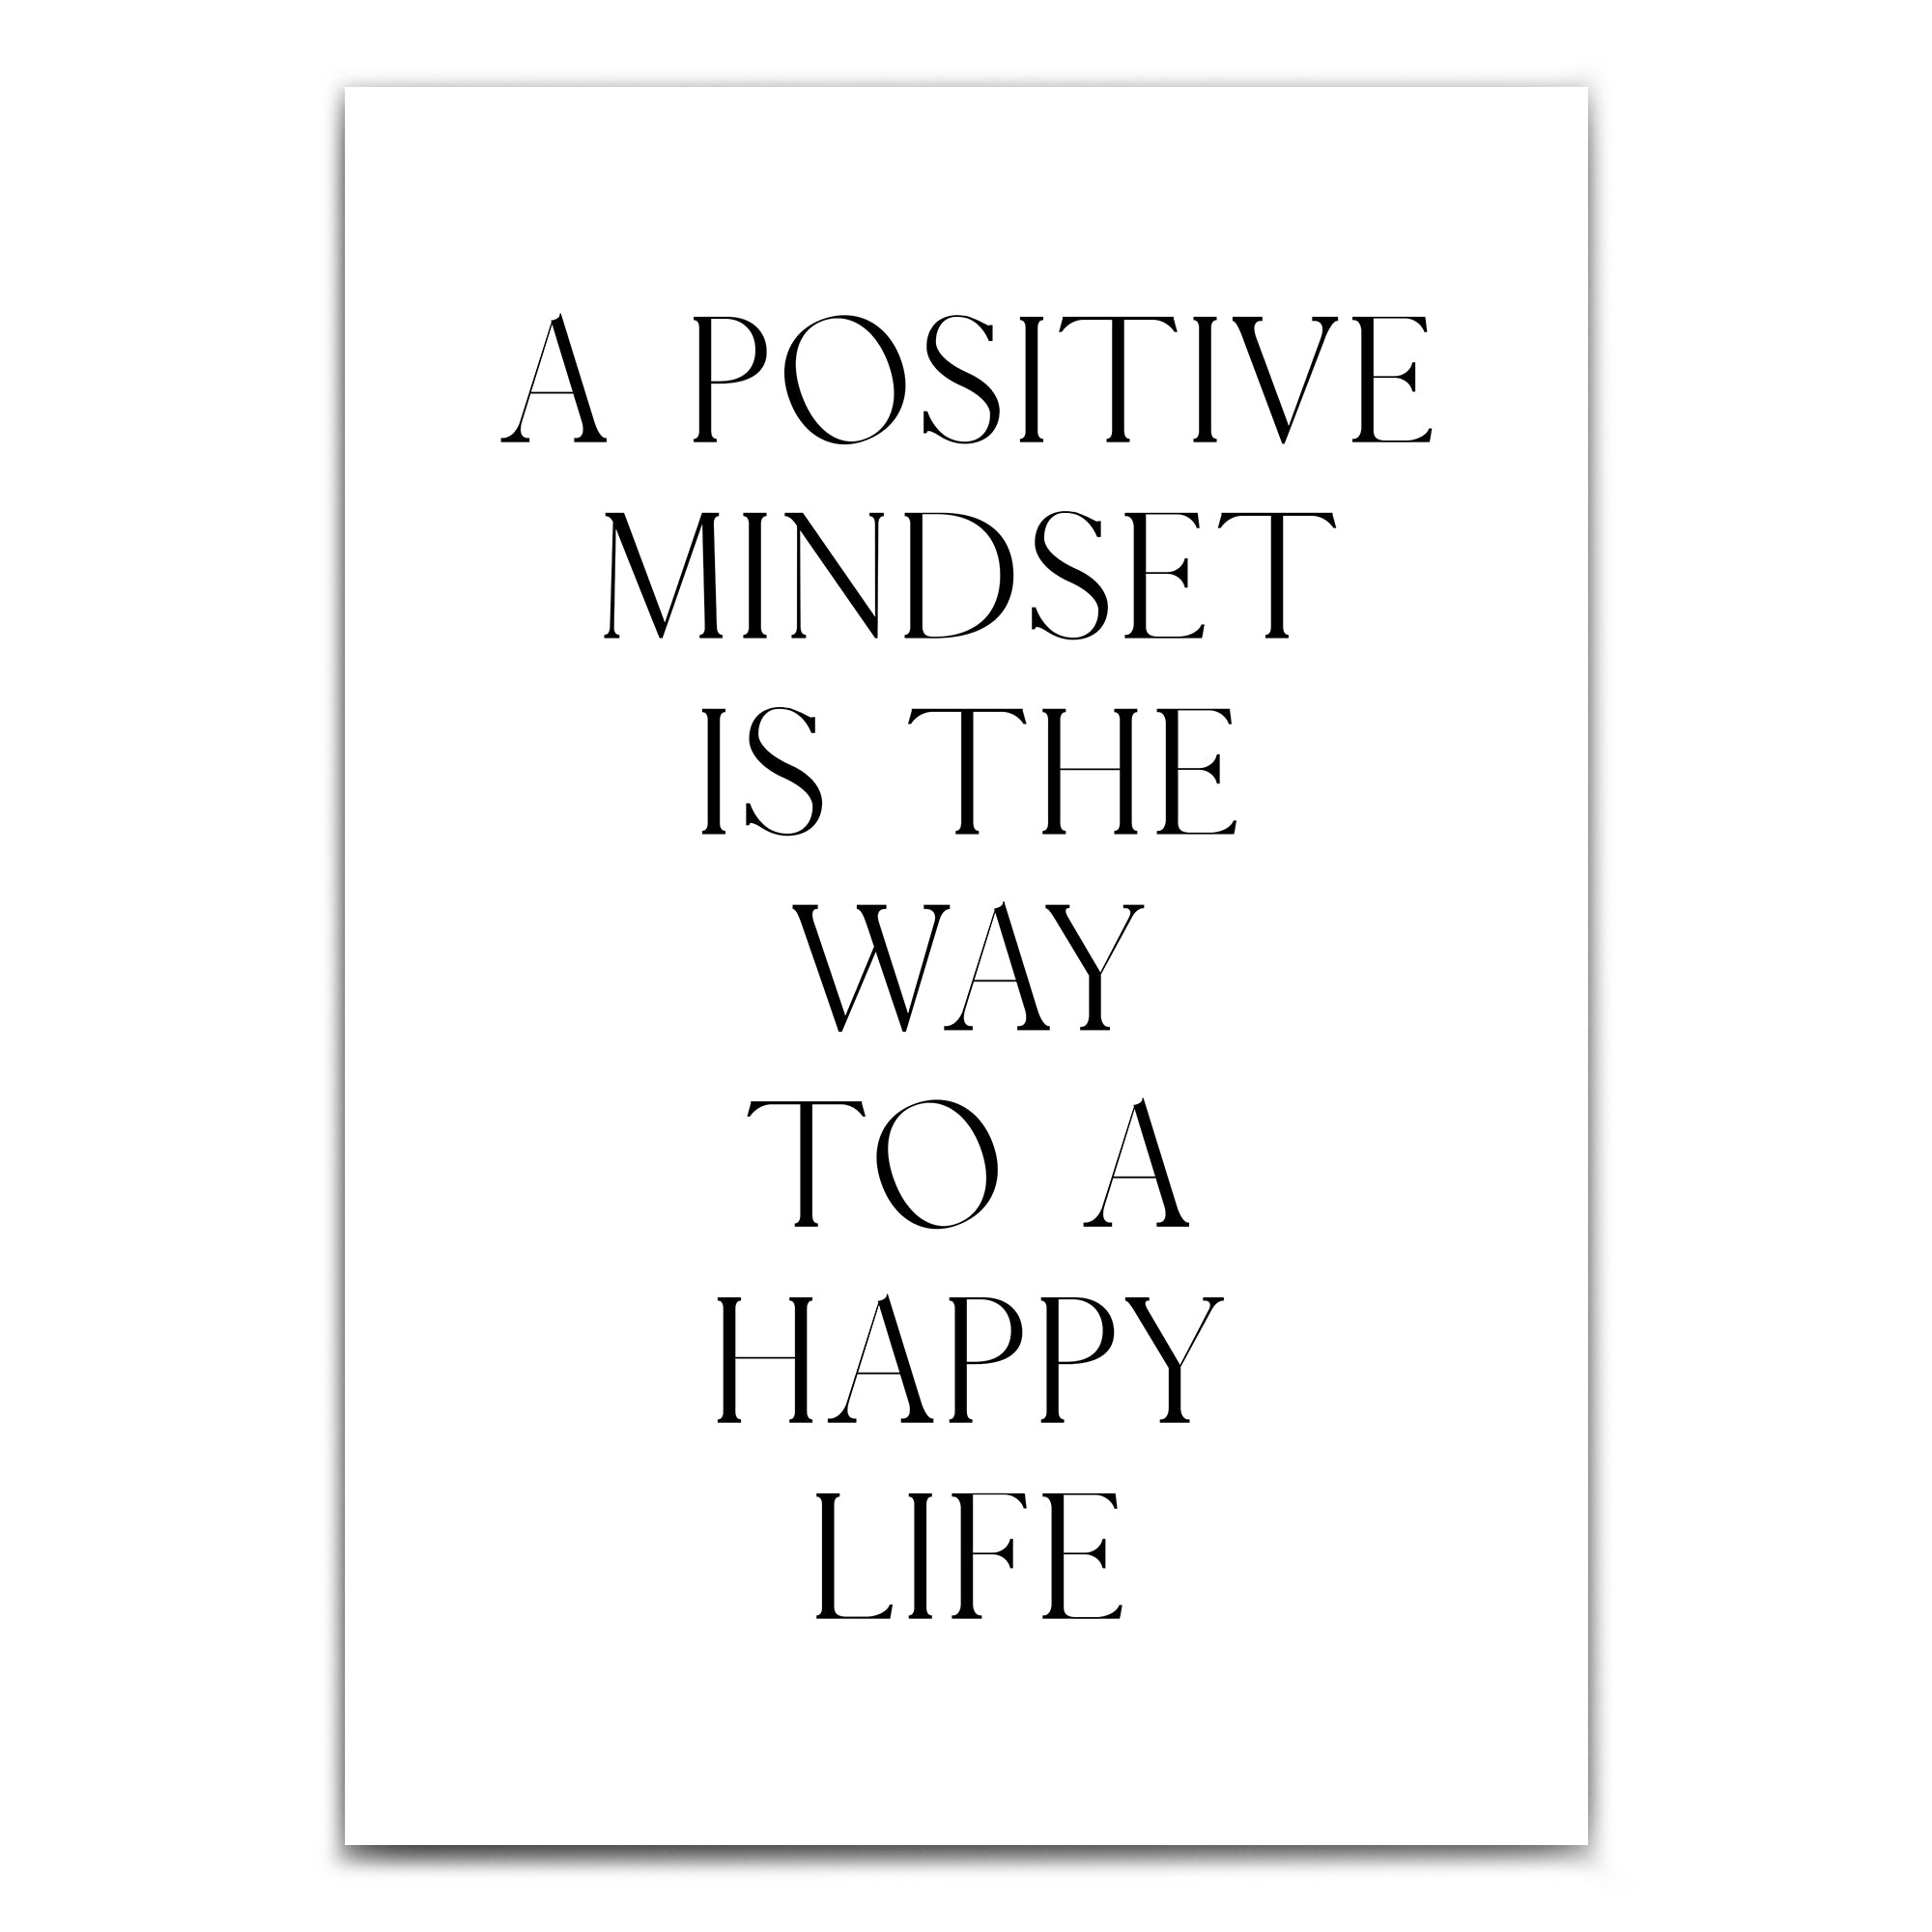 4one_pictures_a4_motivation_poster_typo_quotes_mindset_life_happy_bild_4one_2c860f39-439c-4b30-8f9e-0298dcd12bfb.jpg